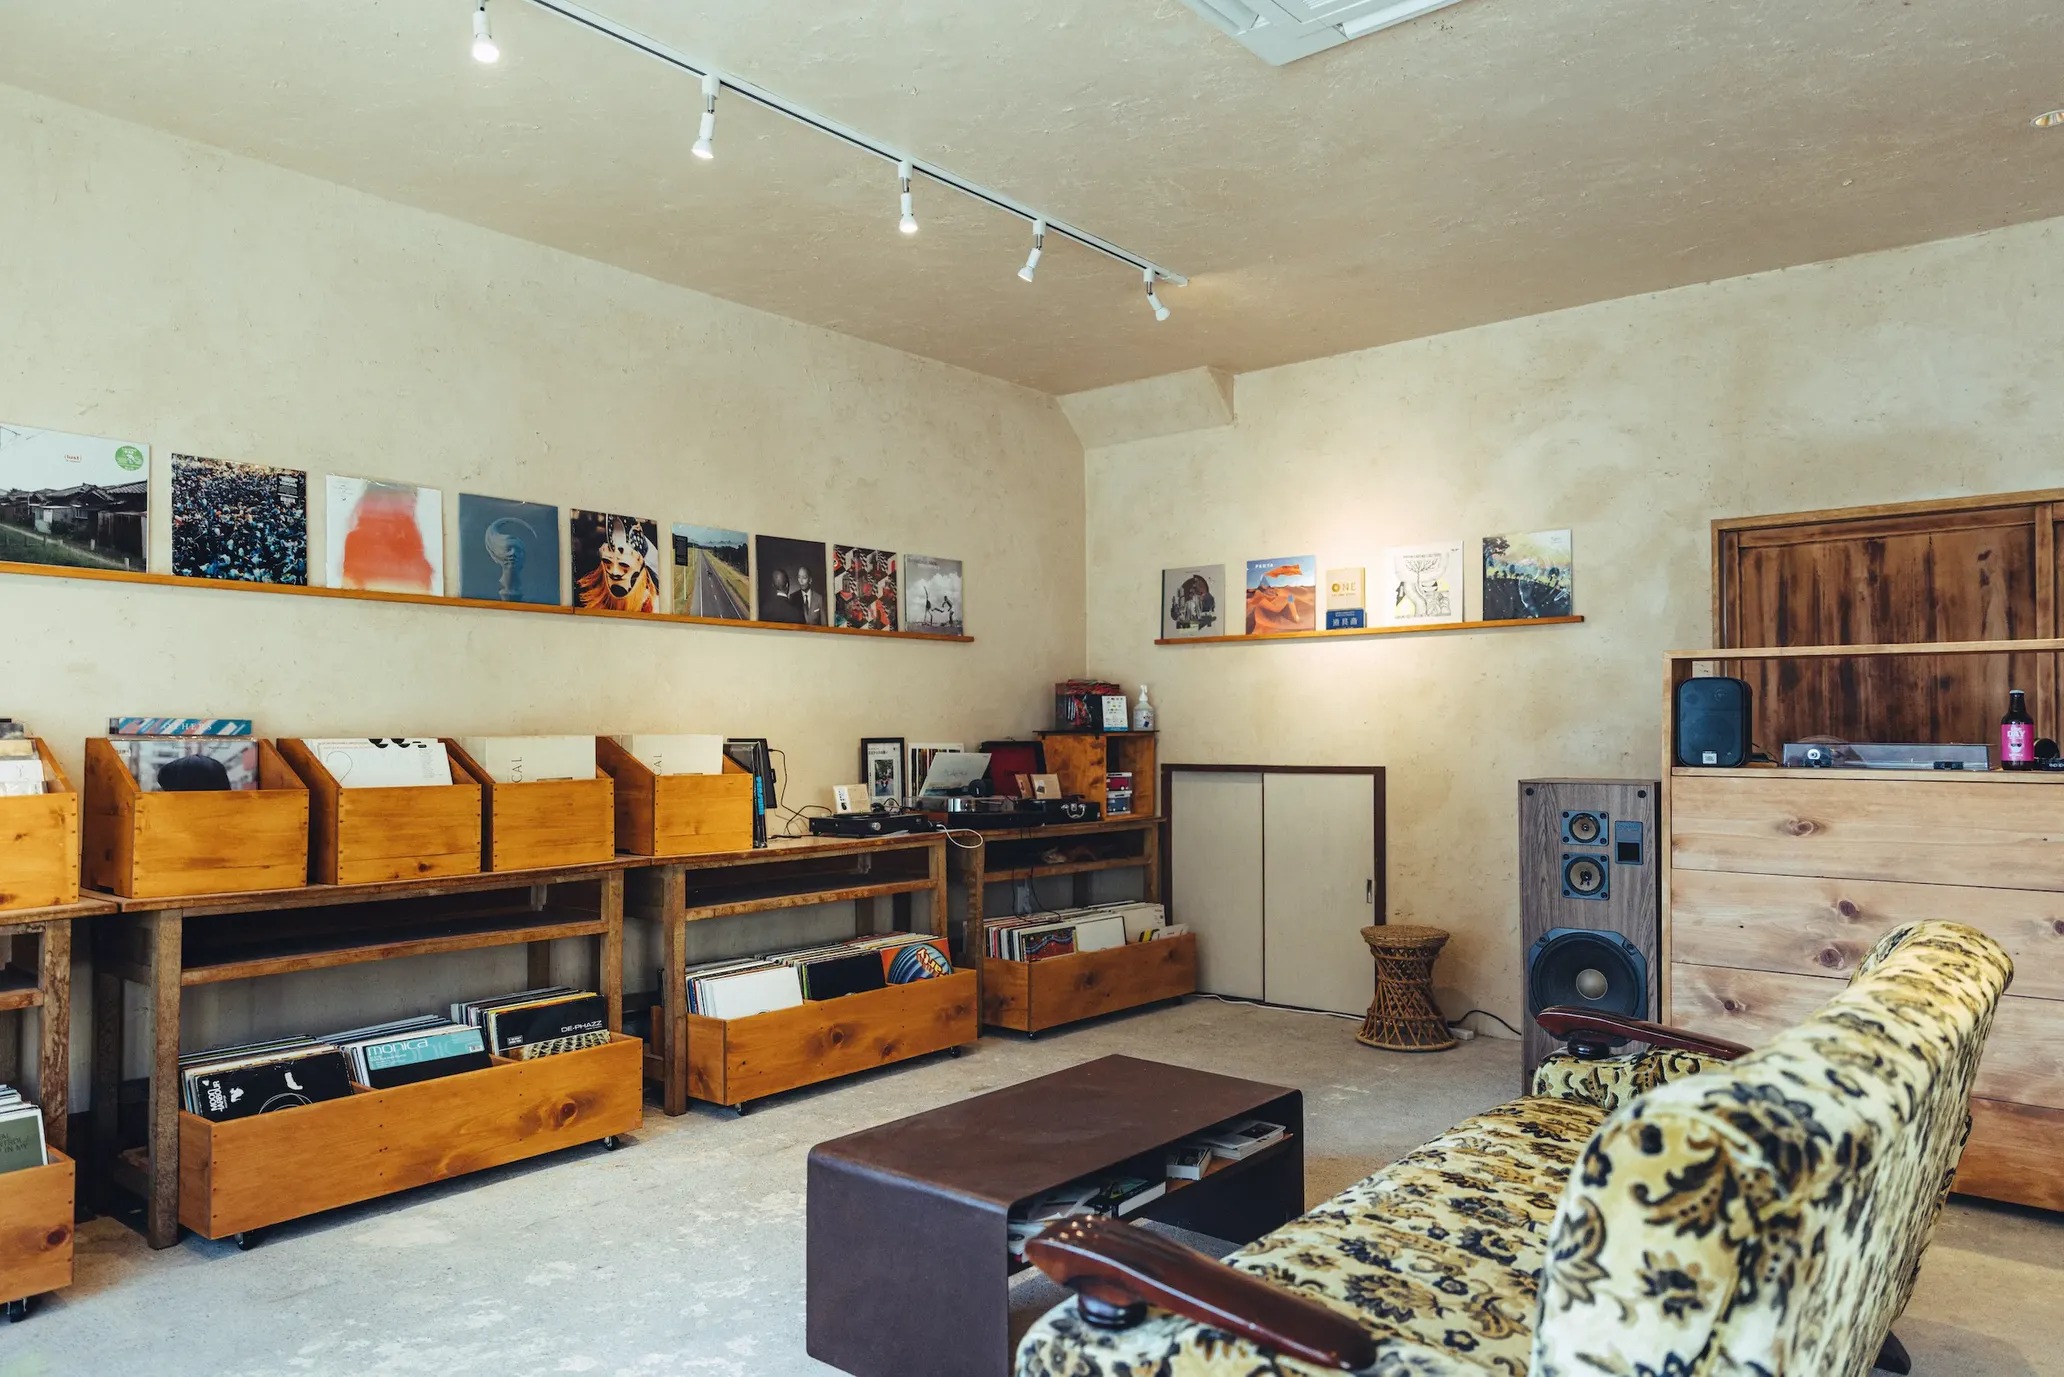 ① A photograph of the interior of ONE RECORD STORE. The interior design, which features old wood and antique furniture to create a sense of warmth, was elaborated by Rebuilding Center Japan.